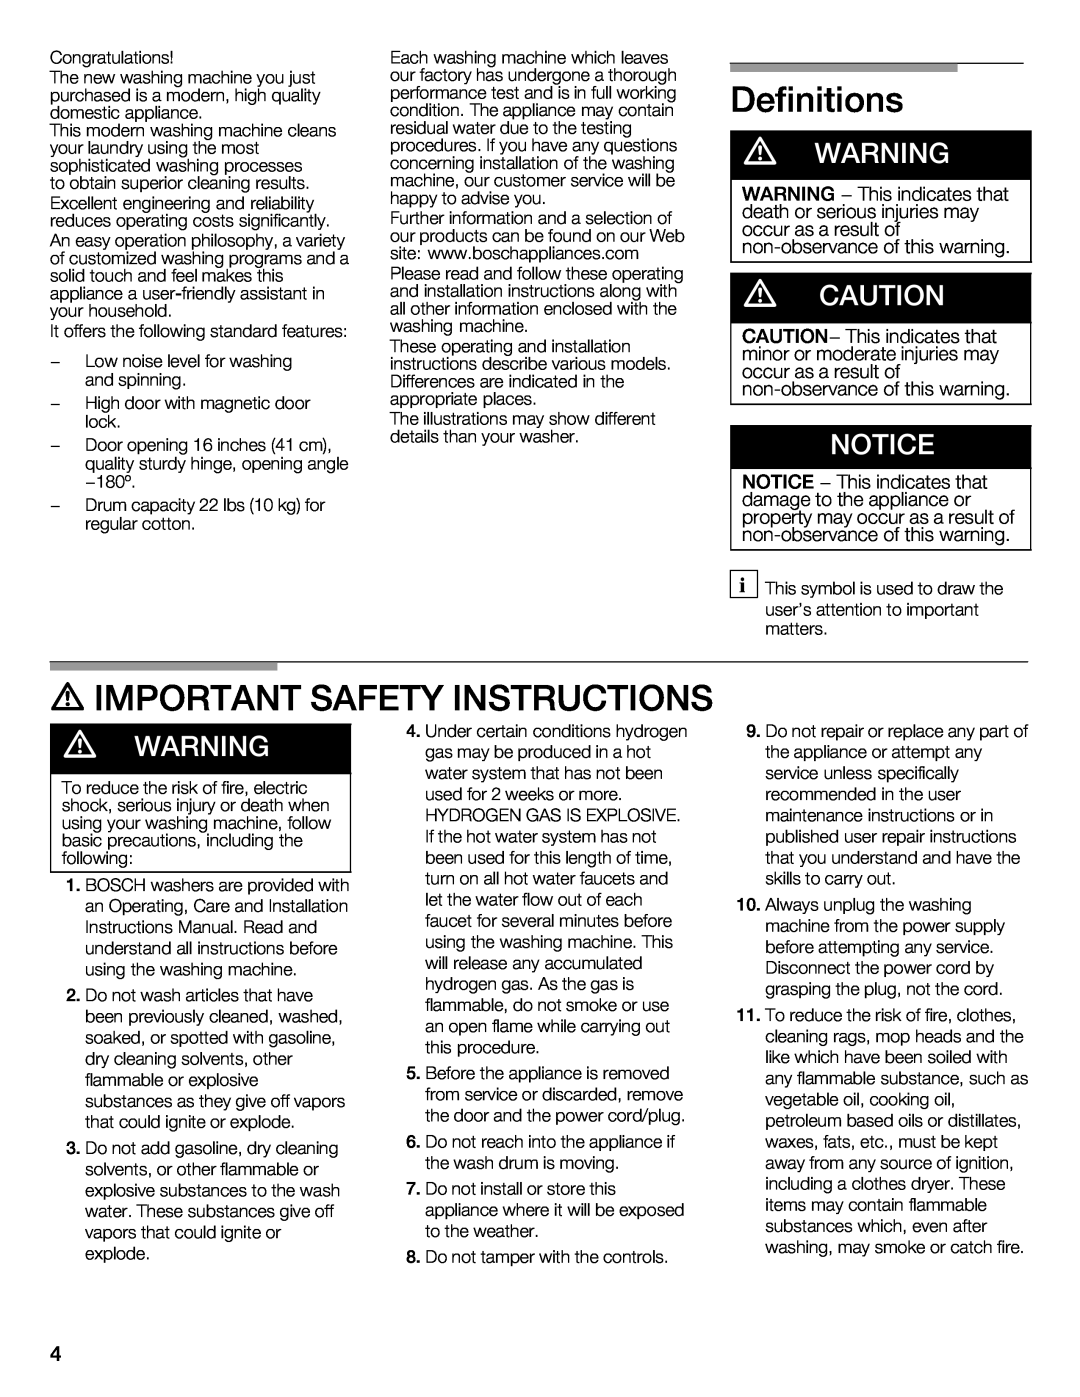 Bosch Appliances 500 Plus Series manual Definitions, d IMPORTANT SAFETY INSTRUCTIONS, d WARNING 